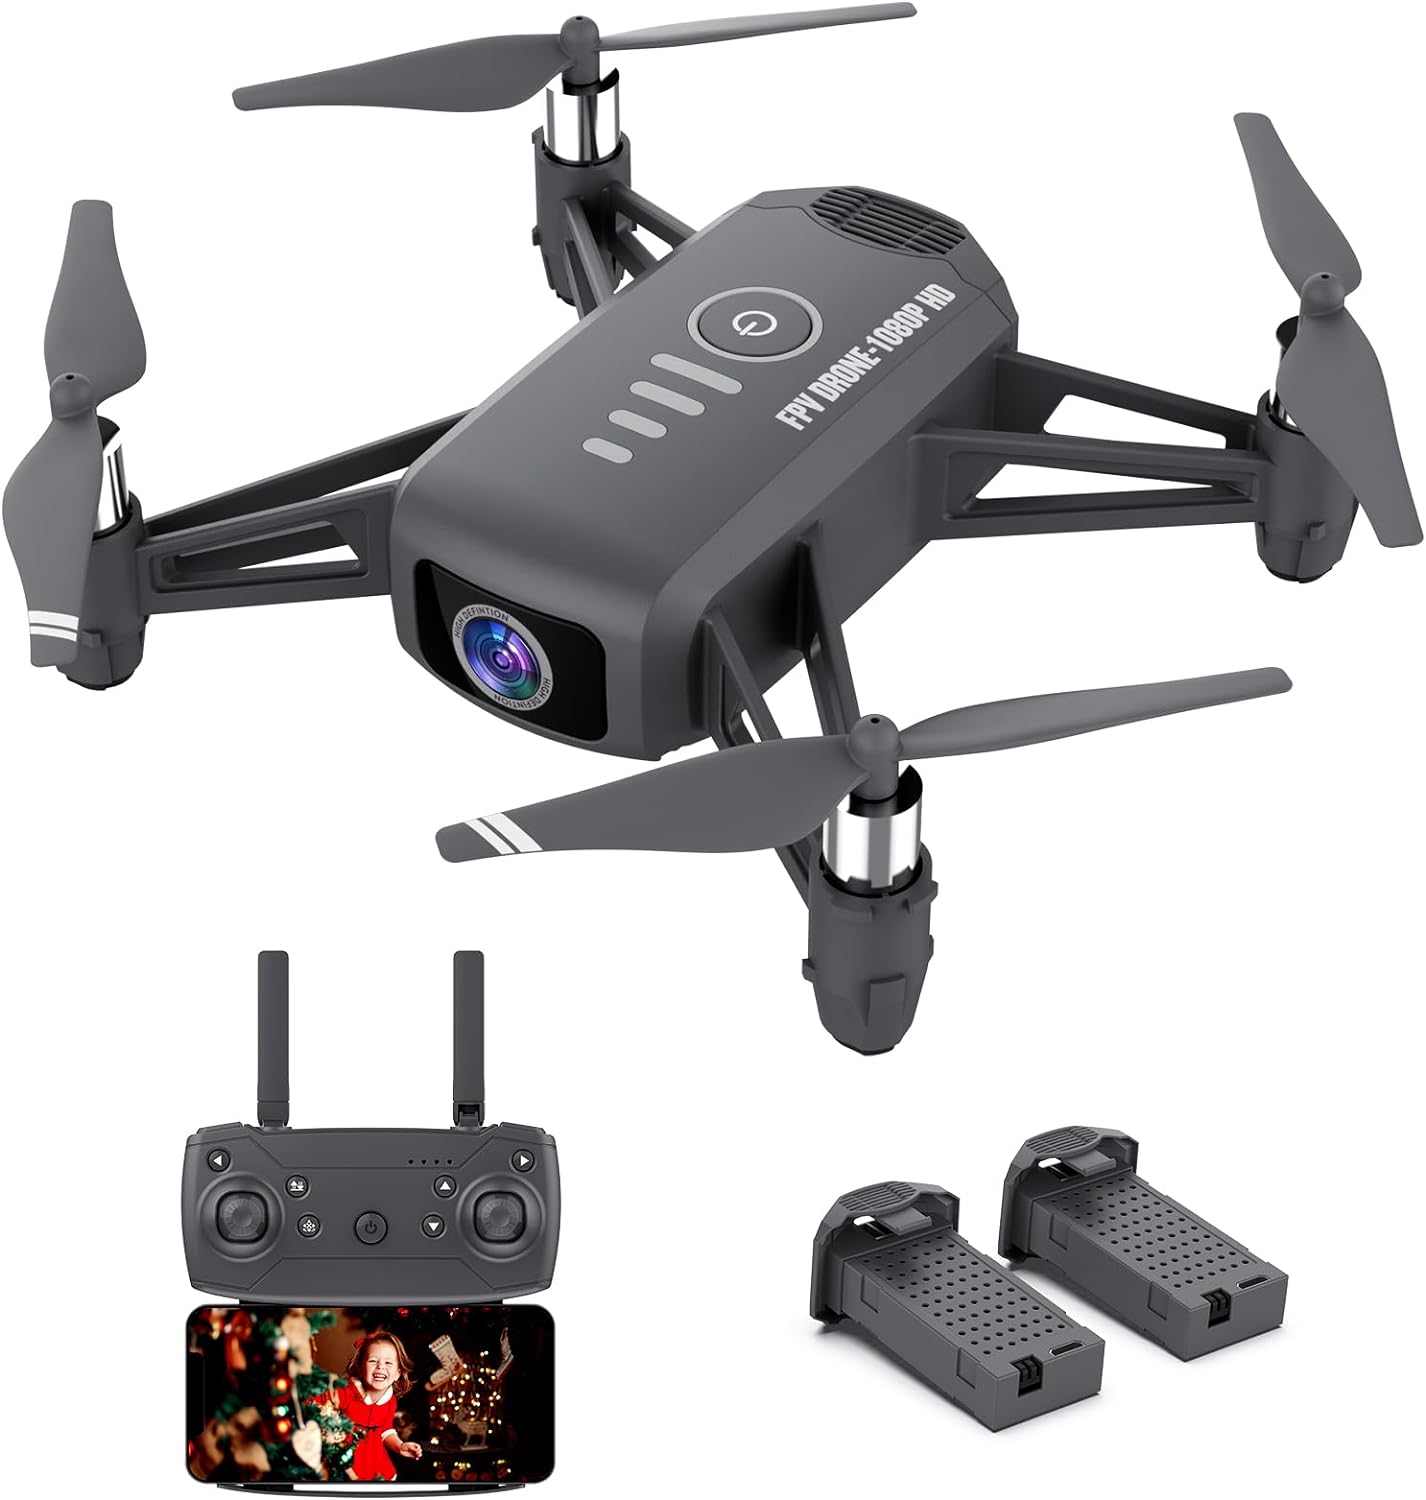 Elukiko Drone with Camera for Adults Kids, 1080P HD Mini FPV Drones, WiFi RC Quadcopter Helicopter, 2 Batteries, Gravity Control, Gesture Control, 3D Flips, Toys Gifts for Boys Girls